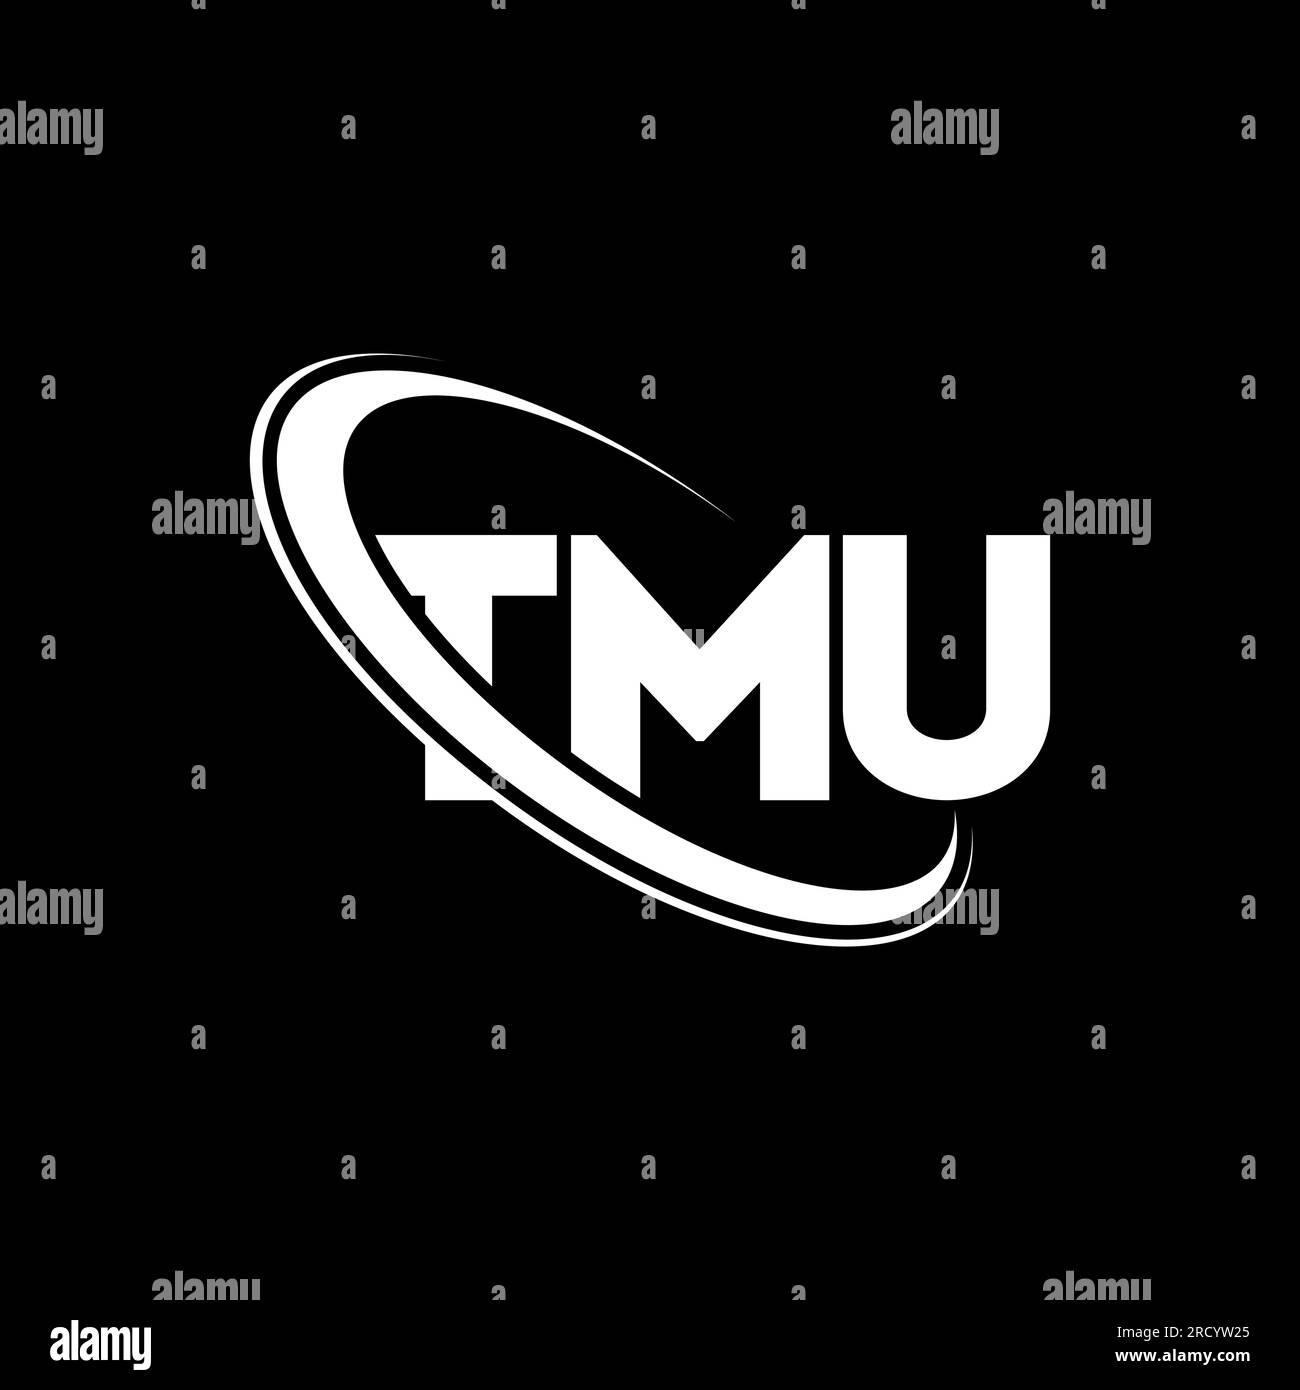 Tmu business logo hi-res stock photography and images - Alamy